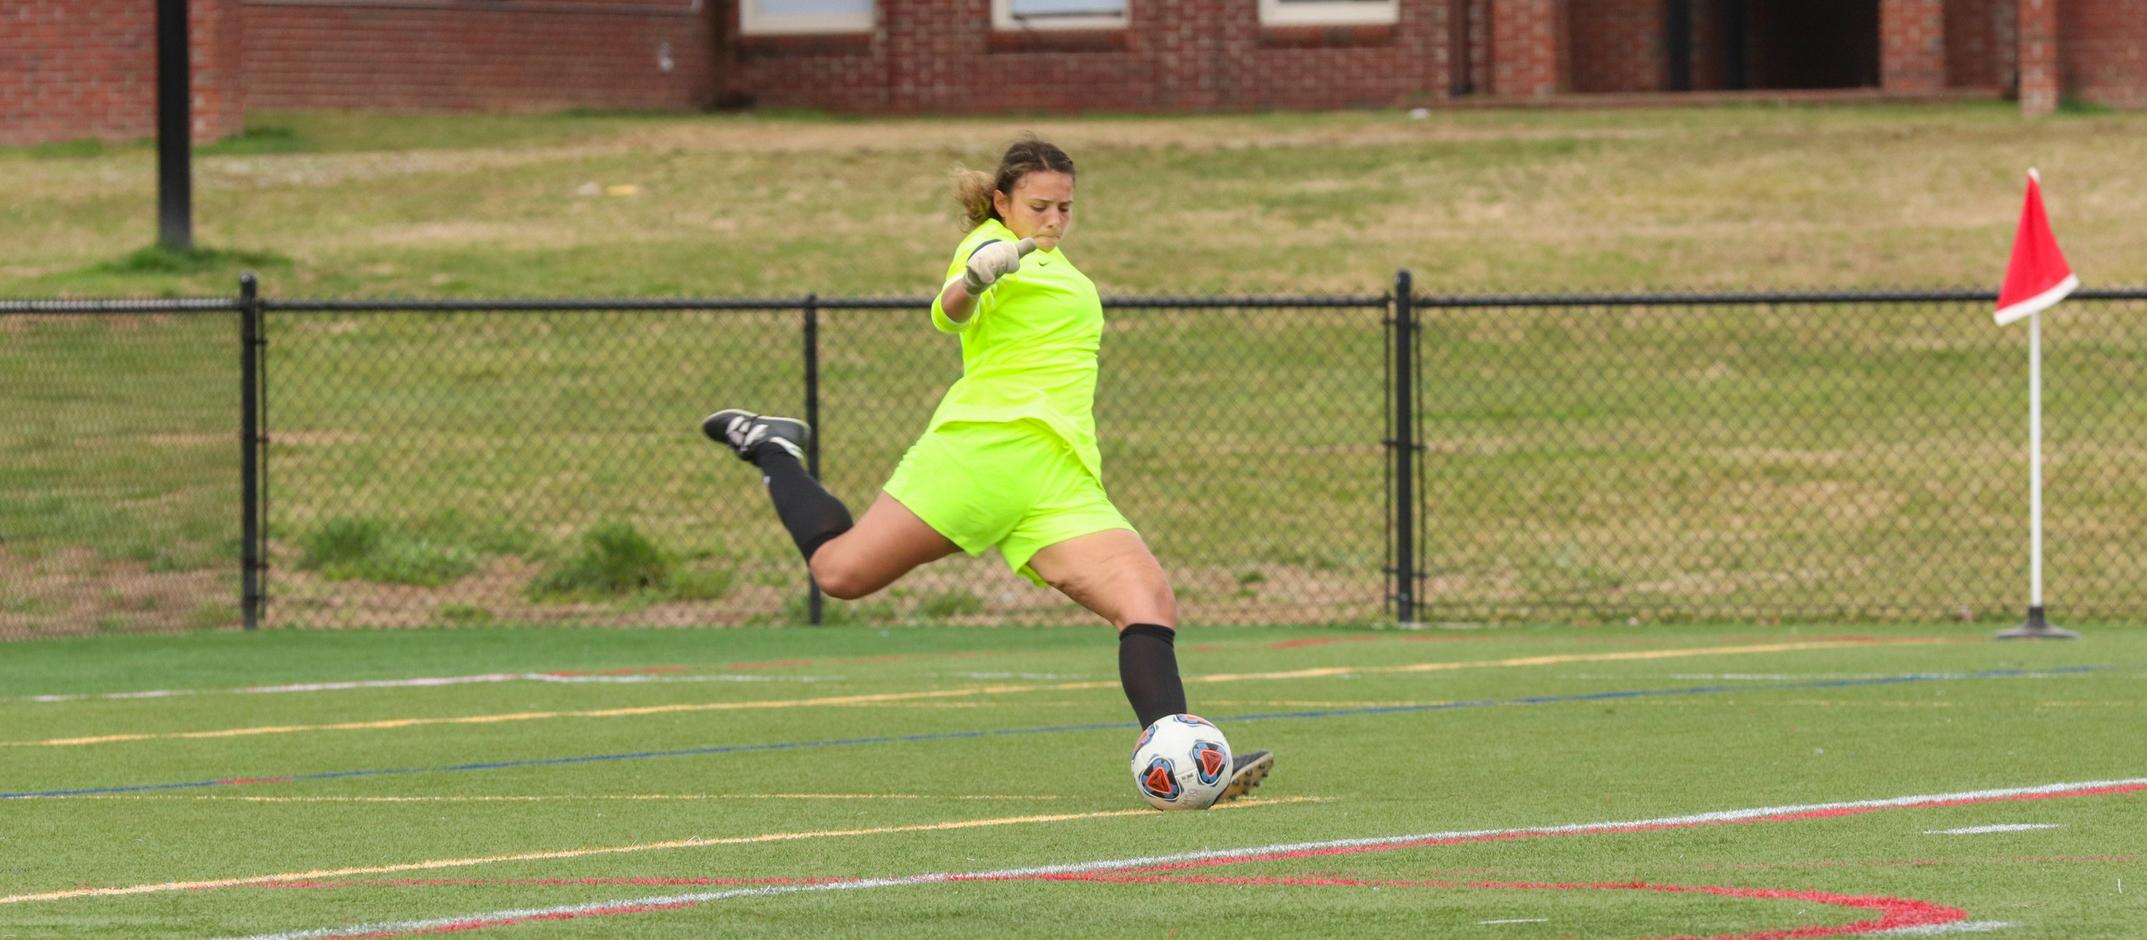 Senior goalkeeper Rebeccah Rojas registered her fifth shutout of the Spring 2021 season on Wednesday in a 0-0 draw vs. NC Wesleyan (Photo courtesy of Victoria Brayman '22).